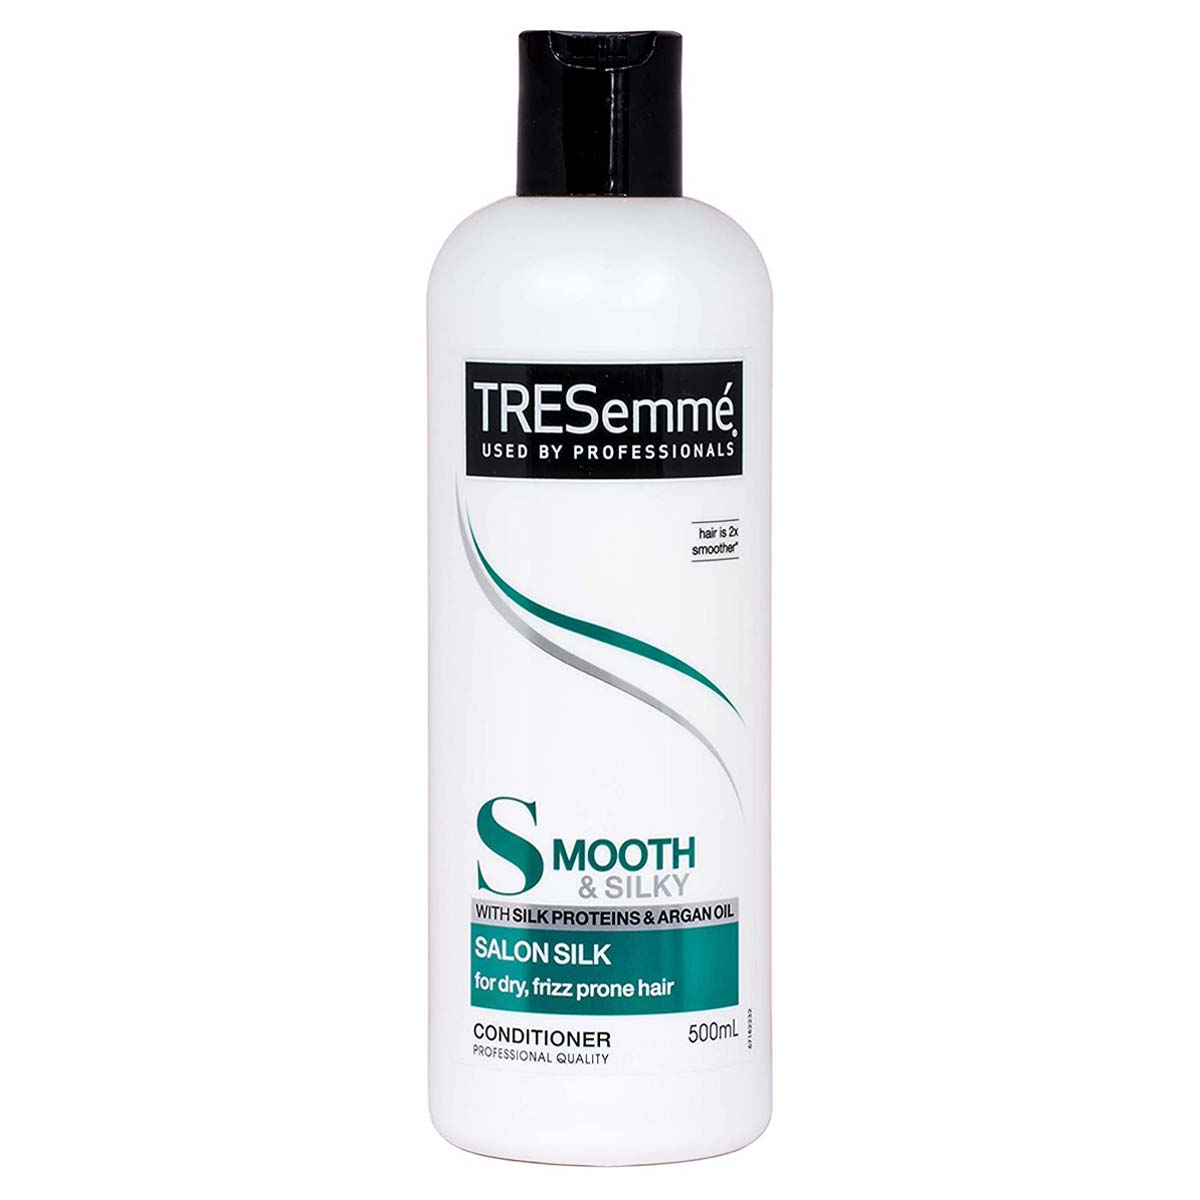 TreSemme - Smooth Salon Silk Conditioner - 500ml - Continental Food Store